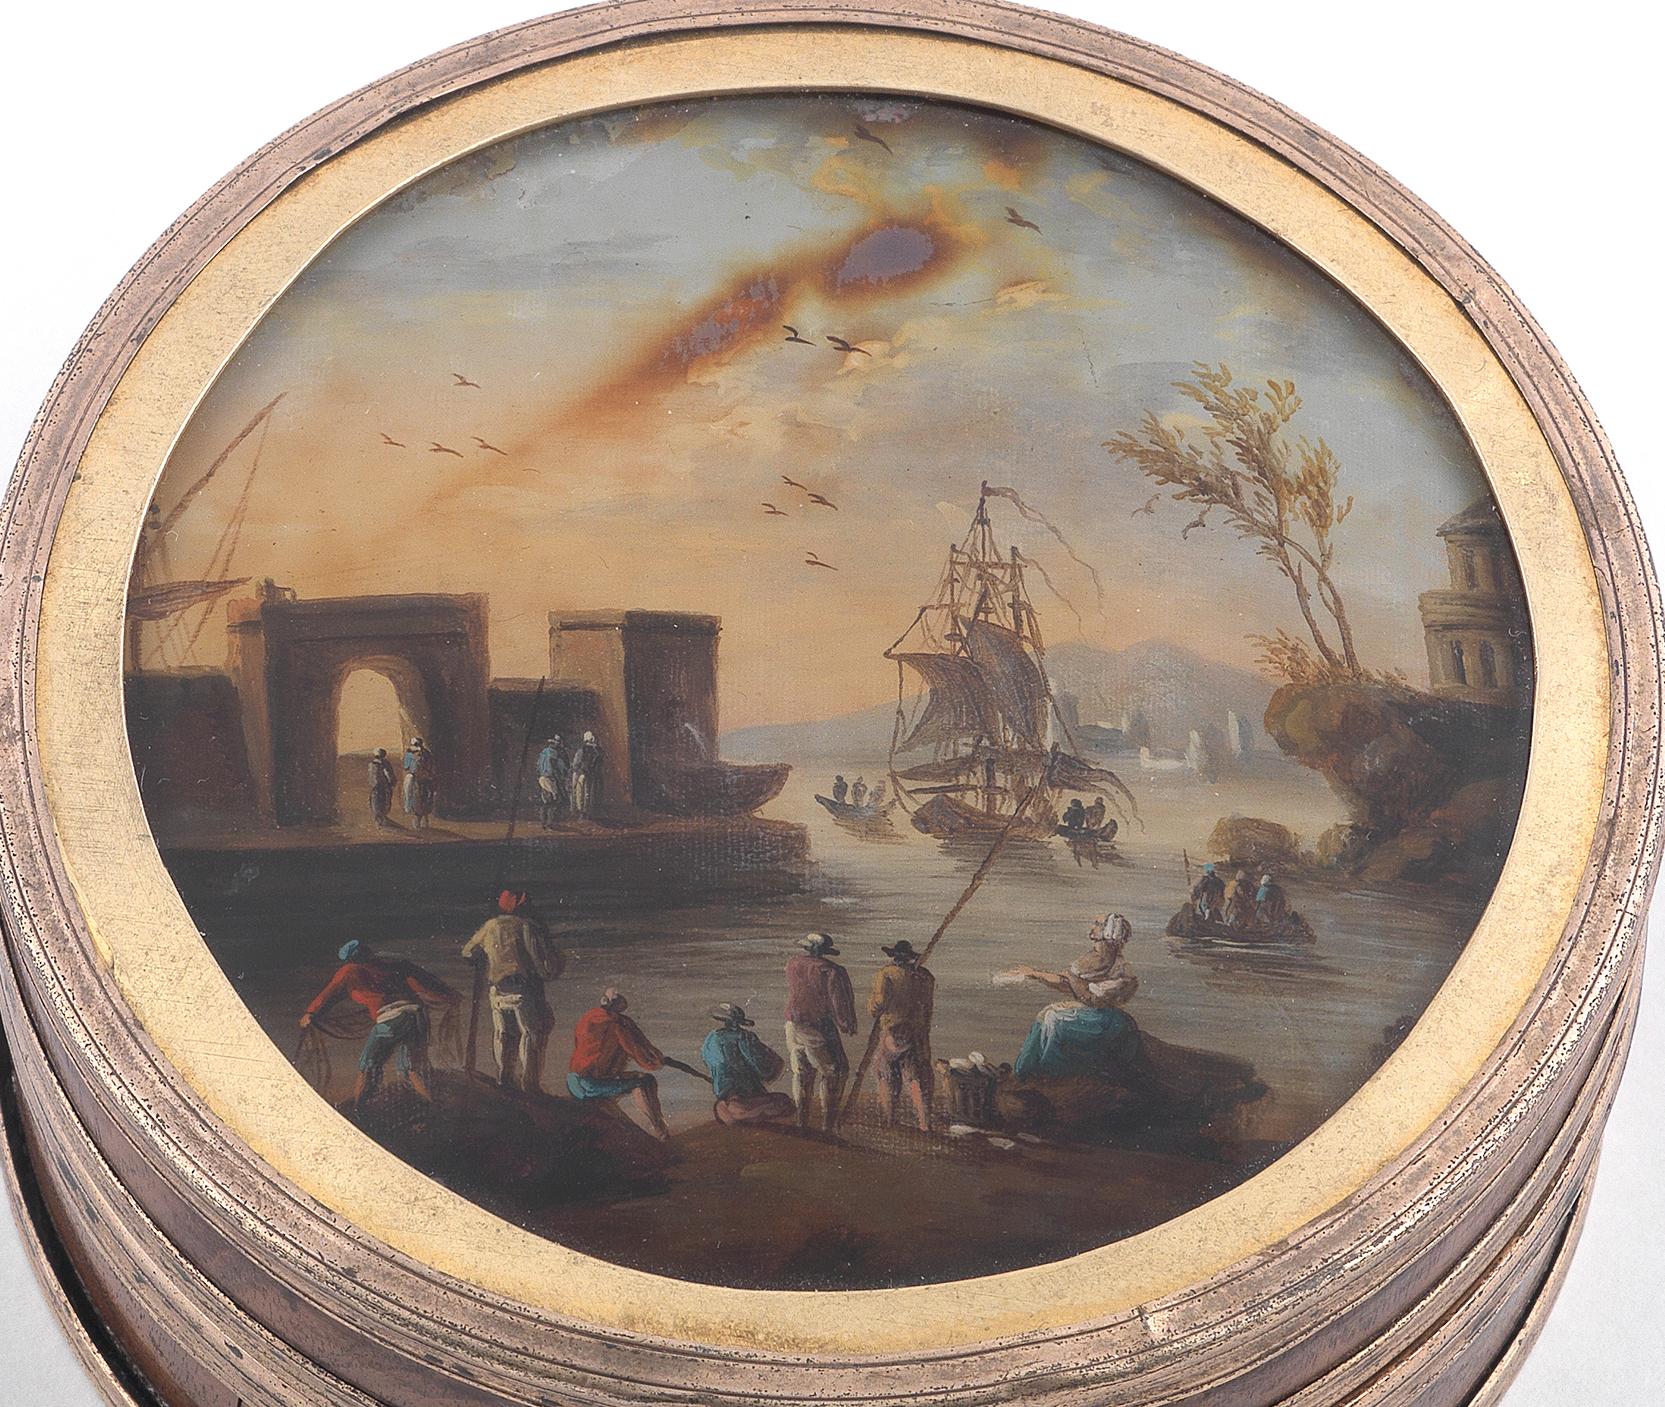 BERNARDO ANTICHITÀ PONTE VECCHIO FLORENCE

The lid incorporating a circular painted panel of a continental harbour scene, under glass, within a gilt metal rope border circular frame, 7cm diameter.